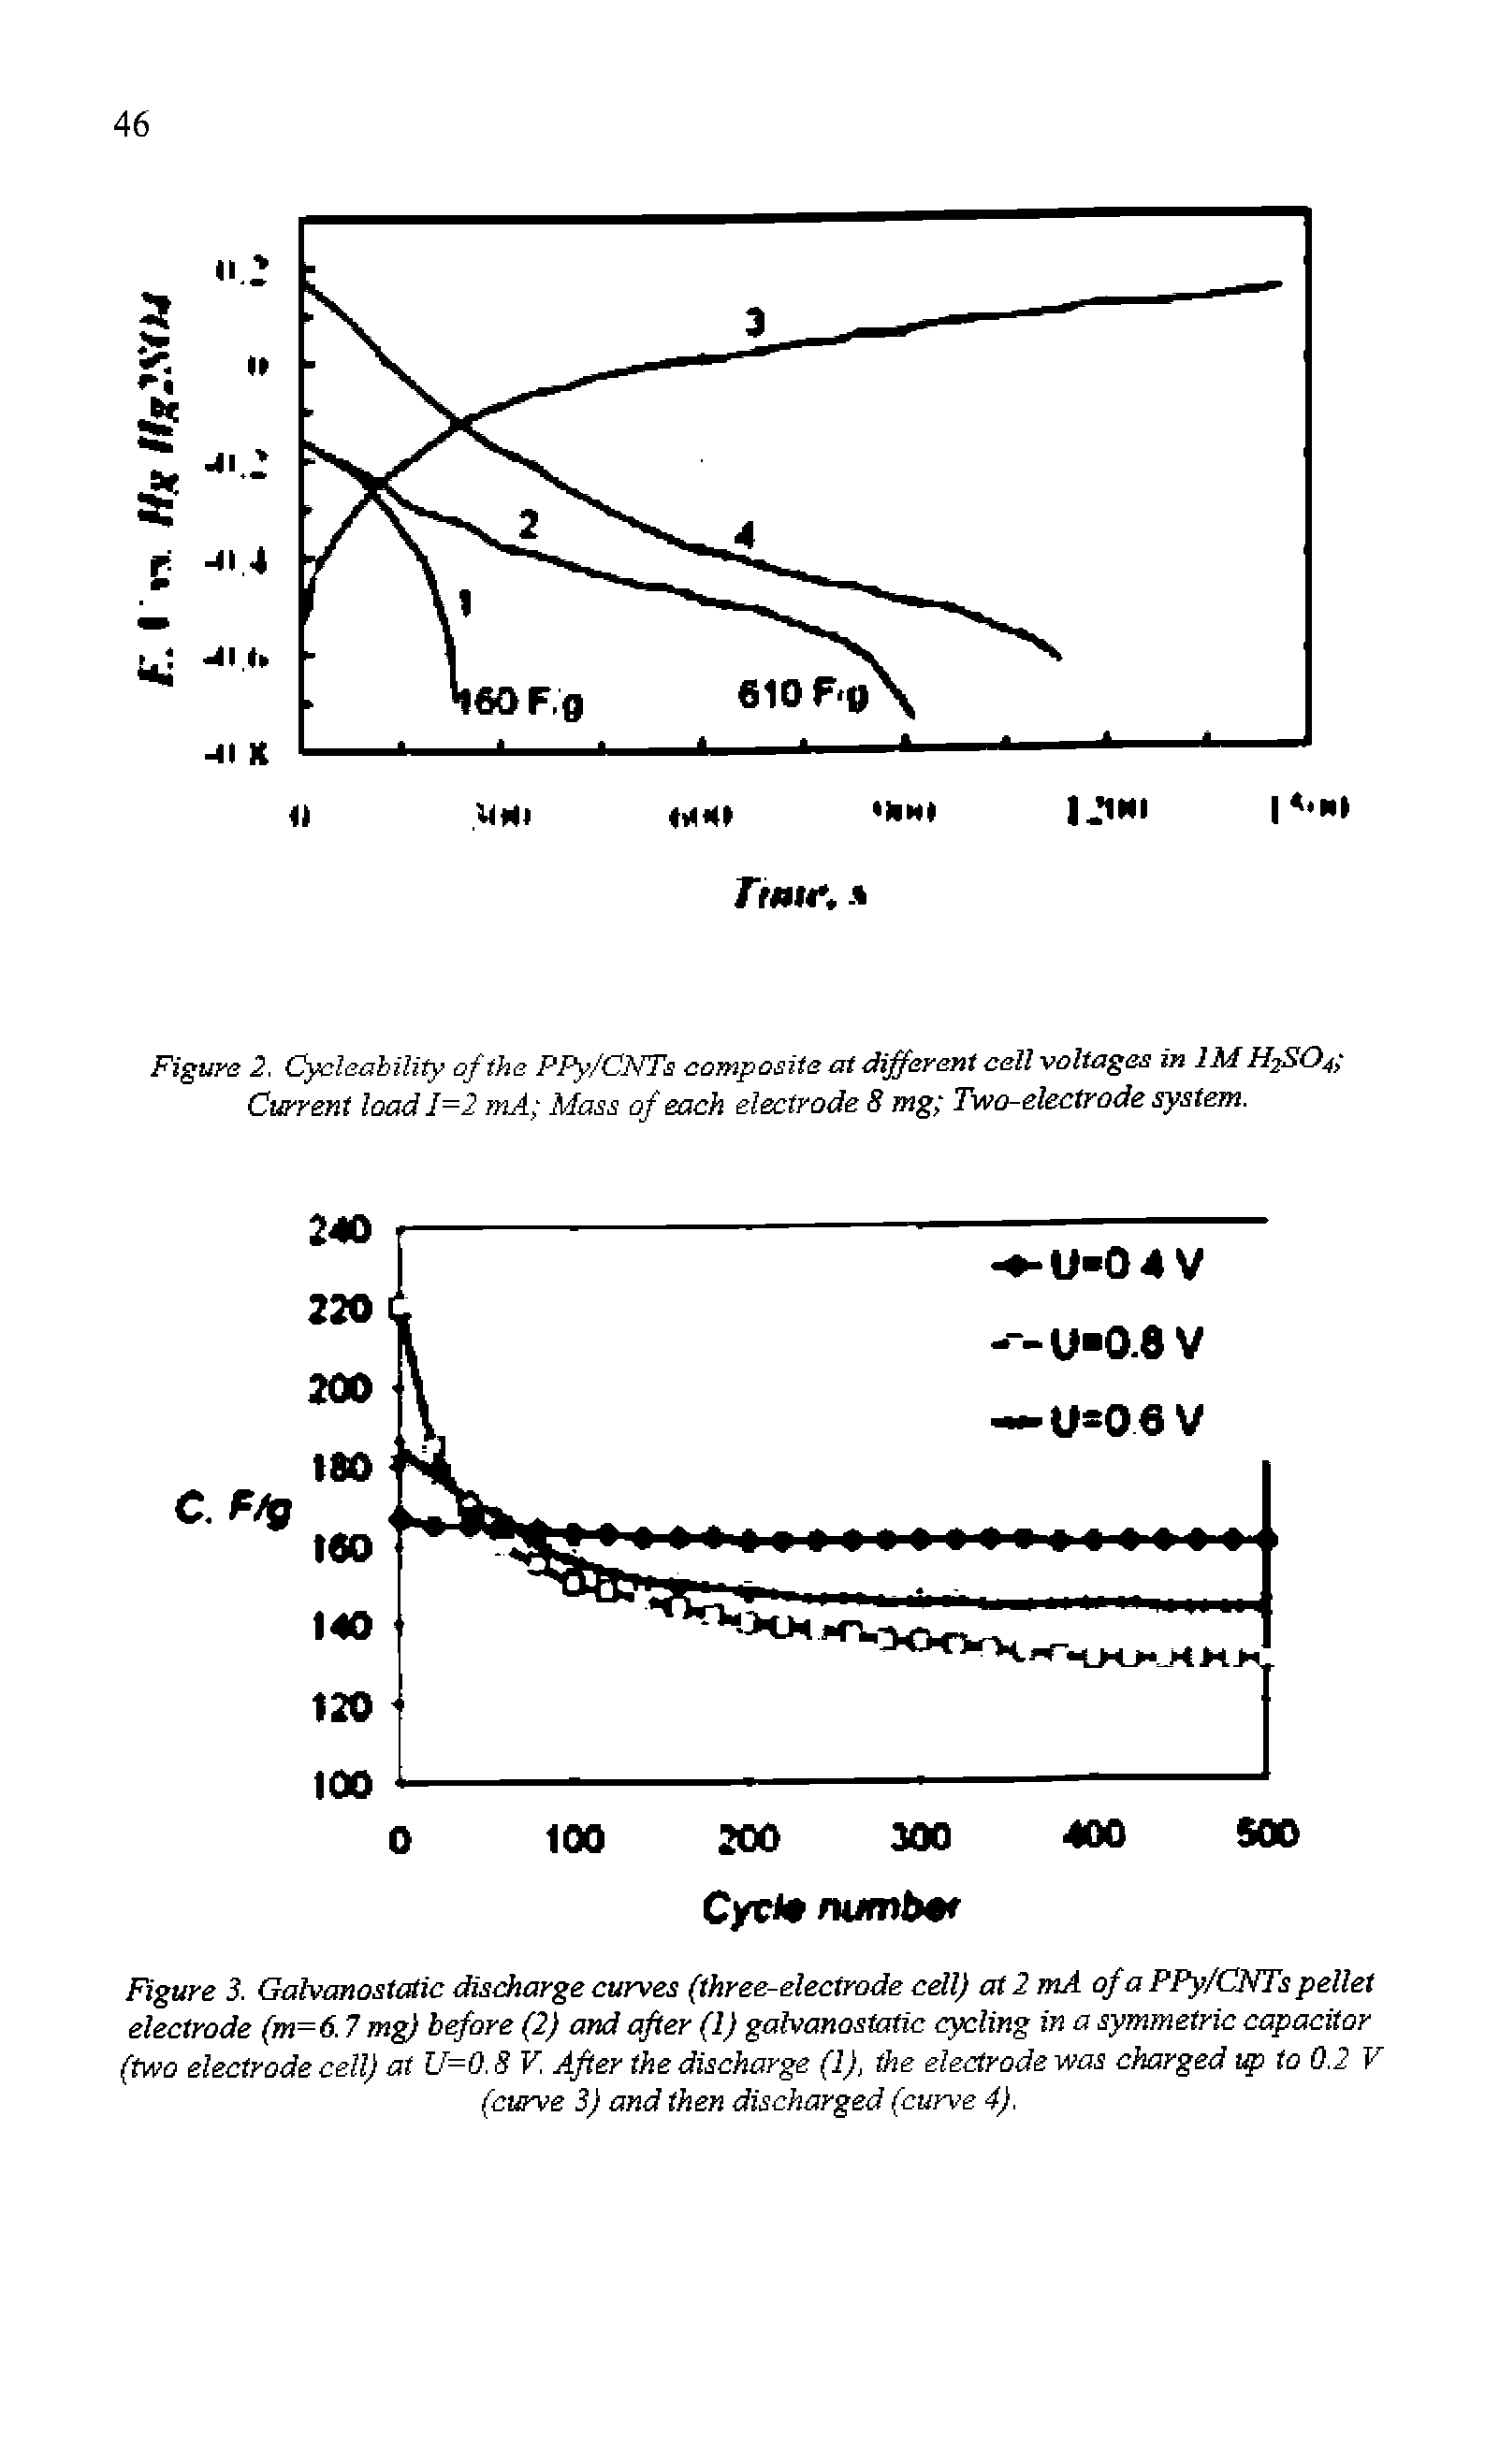 Figure 2. Cycleability of the PPy/CNTs composite at different cell voltages in 1M H2SO4 Current load 1=2 mA Mass of each electrode 8 mg Two-electrode system.